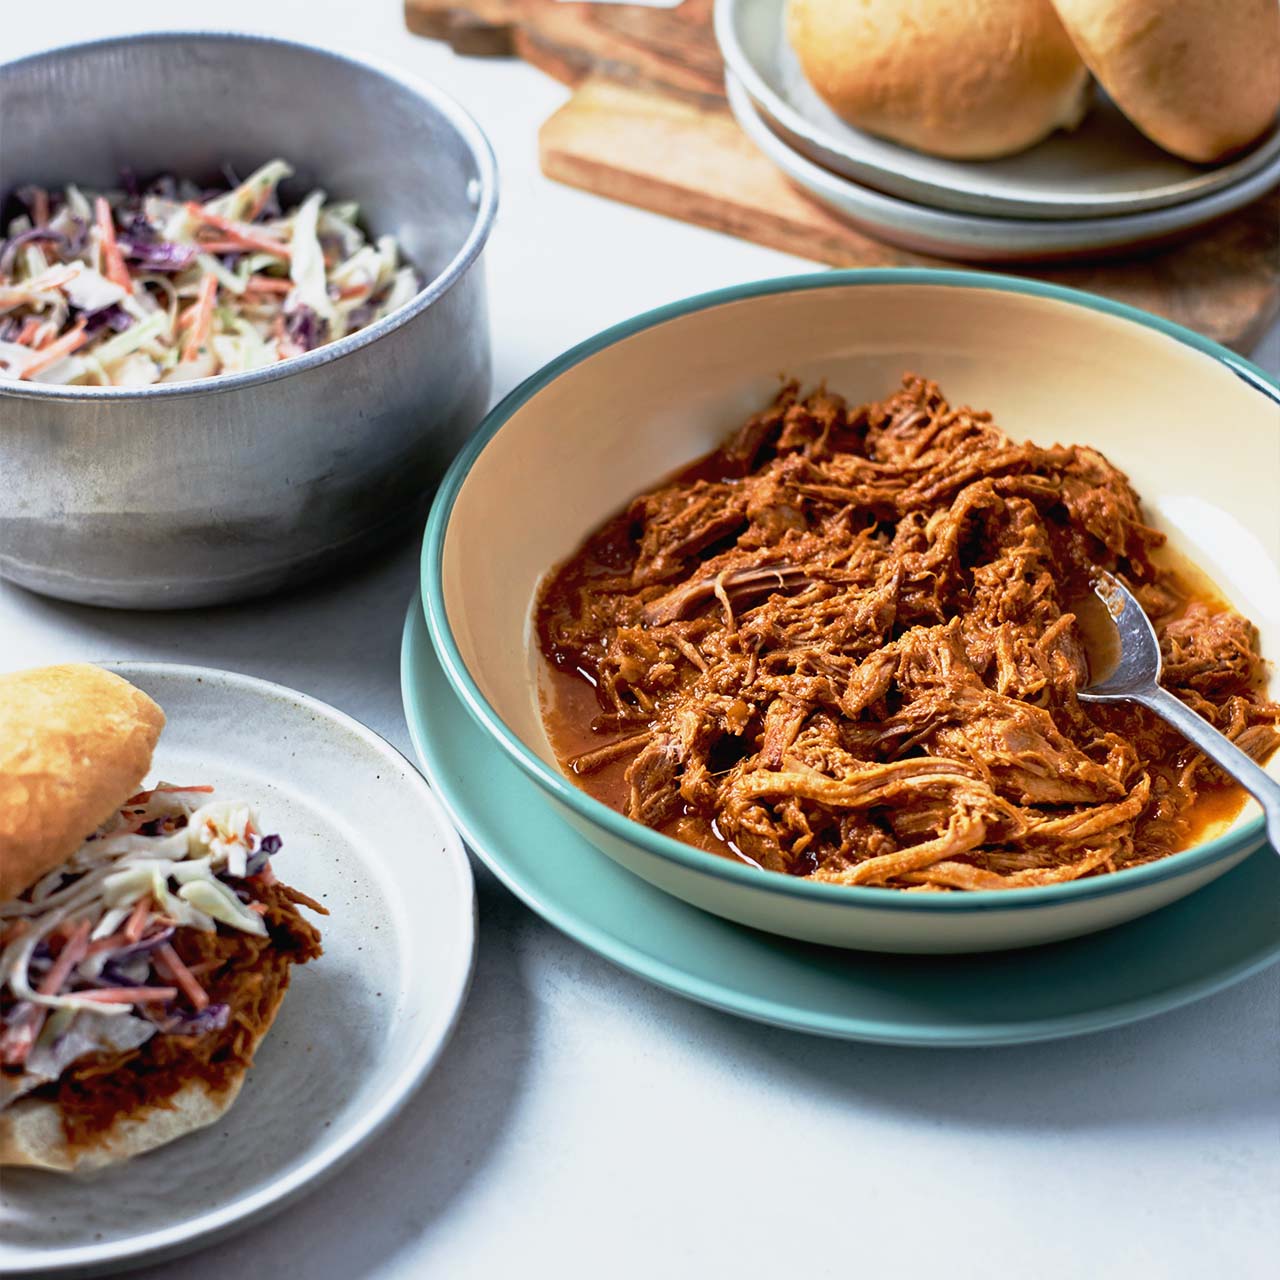 Pulled pork with BBQ sauce